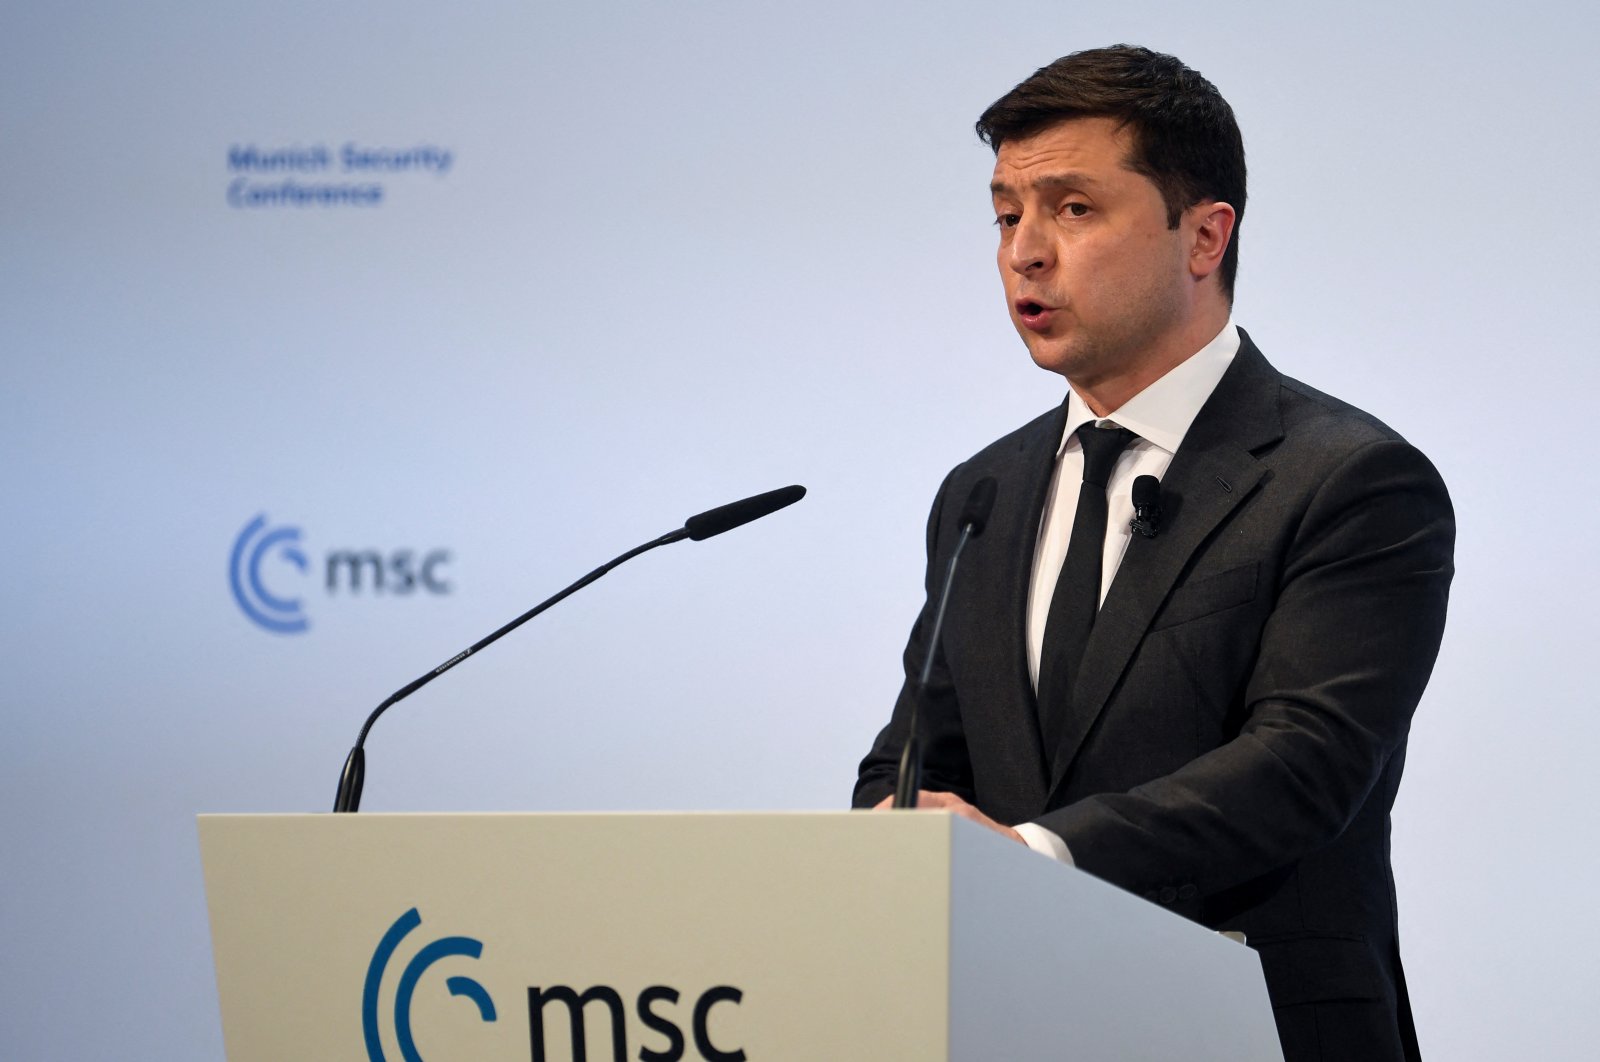 Ukrainian President Volodymyr Zelenskyy speaks during the annual Munich Security Conference, in Munich, Germany Feb. 19, 2022. (Reuters Photo)